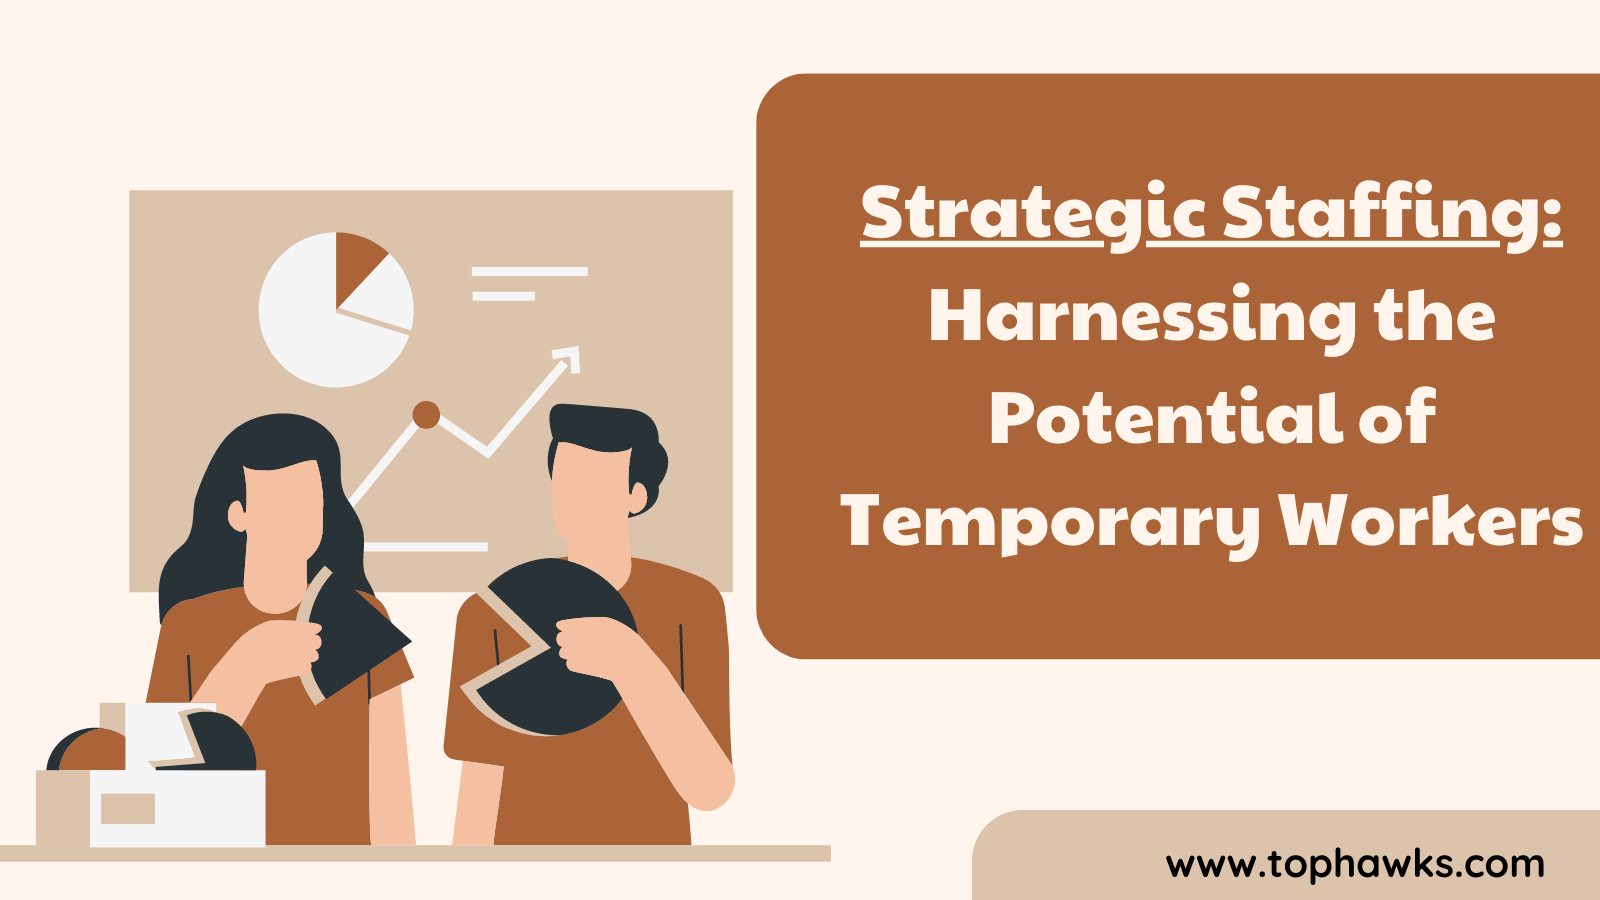 Strategic Staffing Harnessing the Potential of Temporary Workers banner